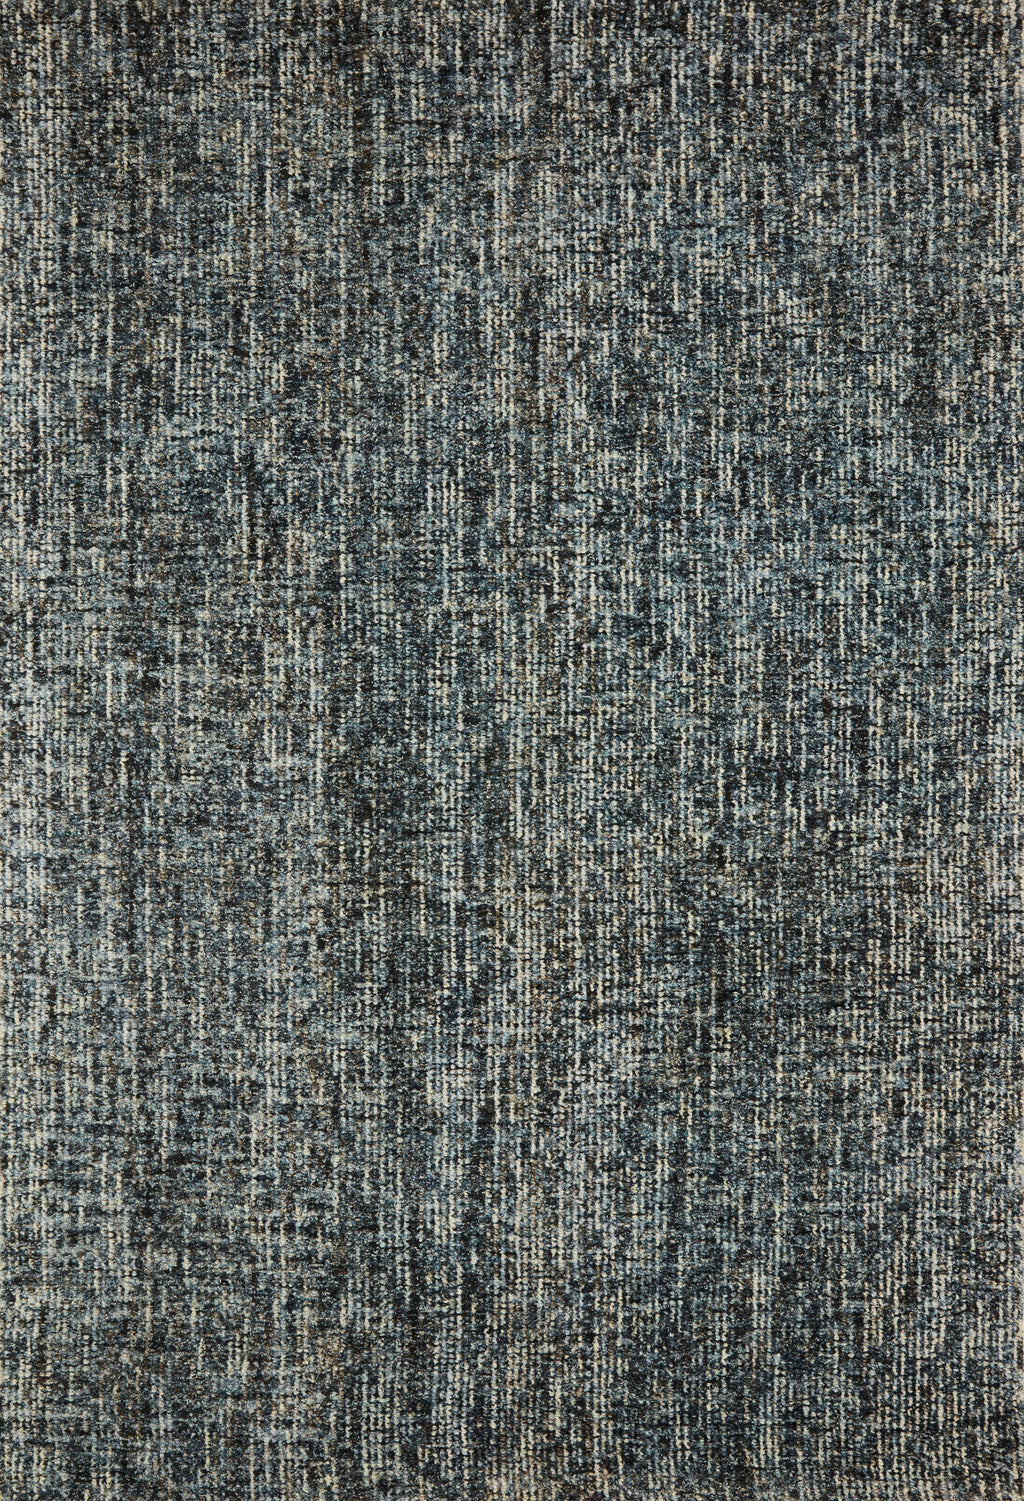 HARLOW Collection Wool Rug  in  DENIM / CHARCOAL Blue Hand-Tufted Wool